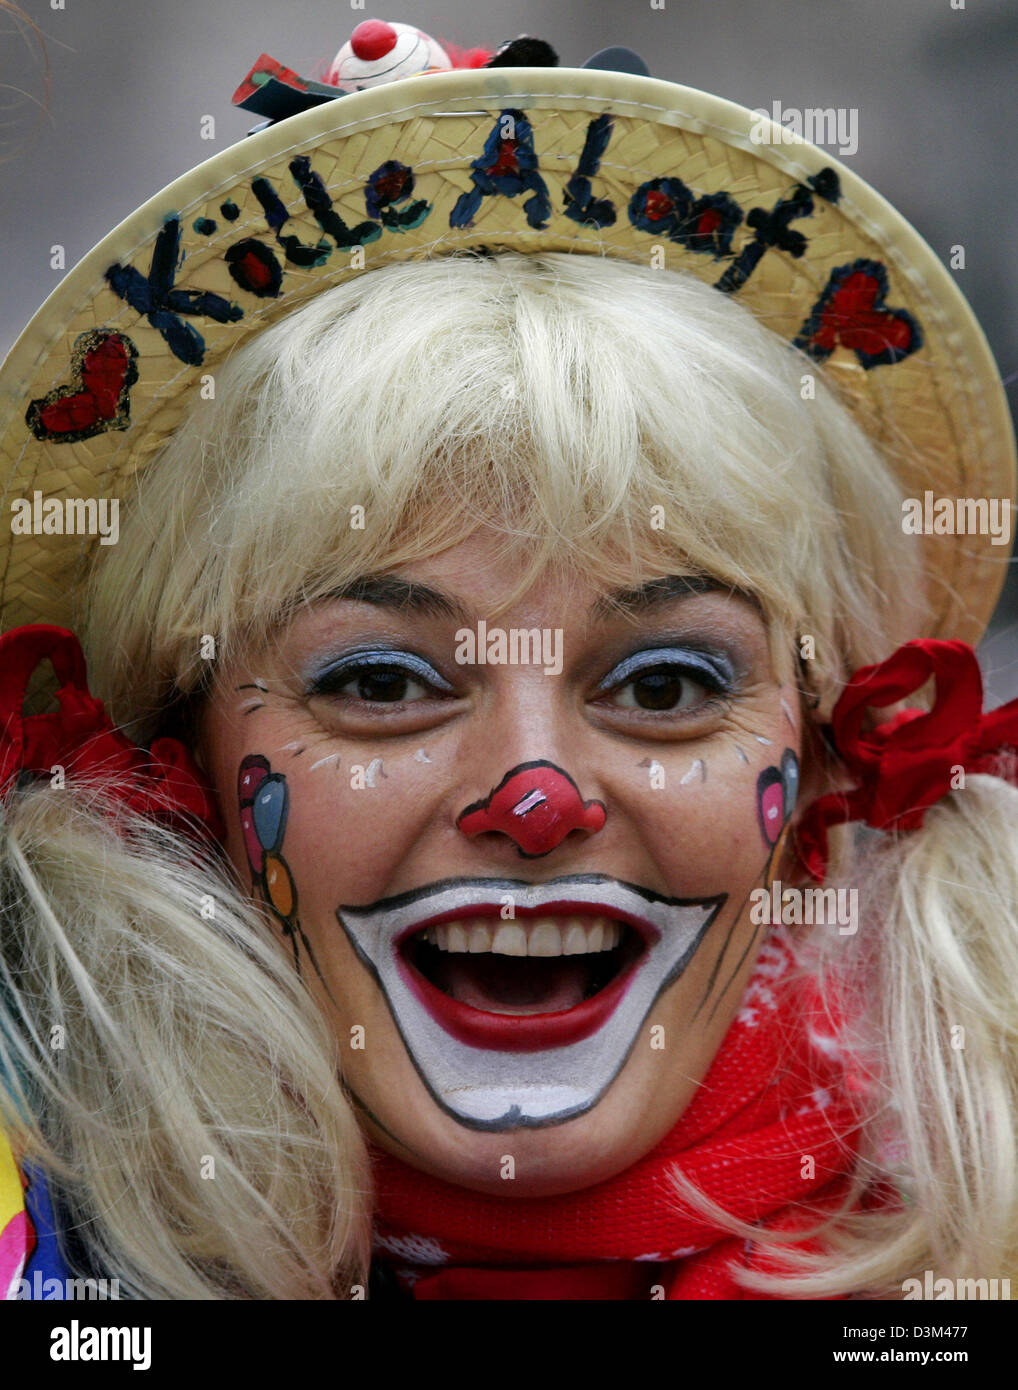 (dpa) - A young woman dressed up as a clown celebrates the carnival season kick-off at 11:11 o'clock at Heumarkt square in Cologne, Germany, Friday 11 November 2005. Several thousands of people celebrated the start of the 'fifth season' on the streets of the German carnival stronghold Cologne. Photo: Roland Weihrauch Stock Photo